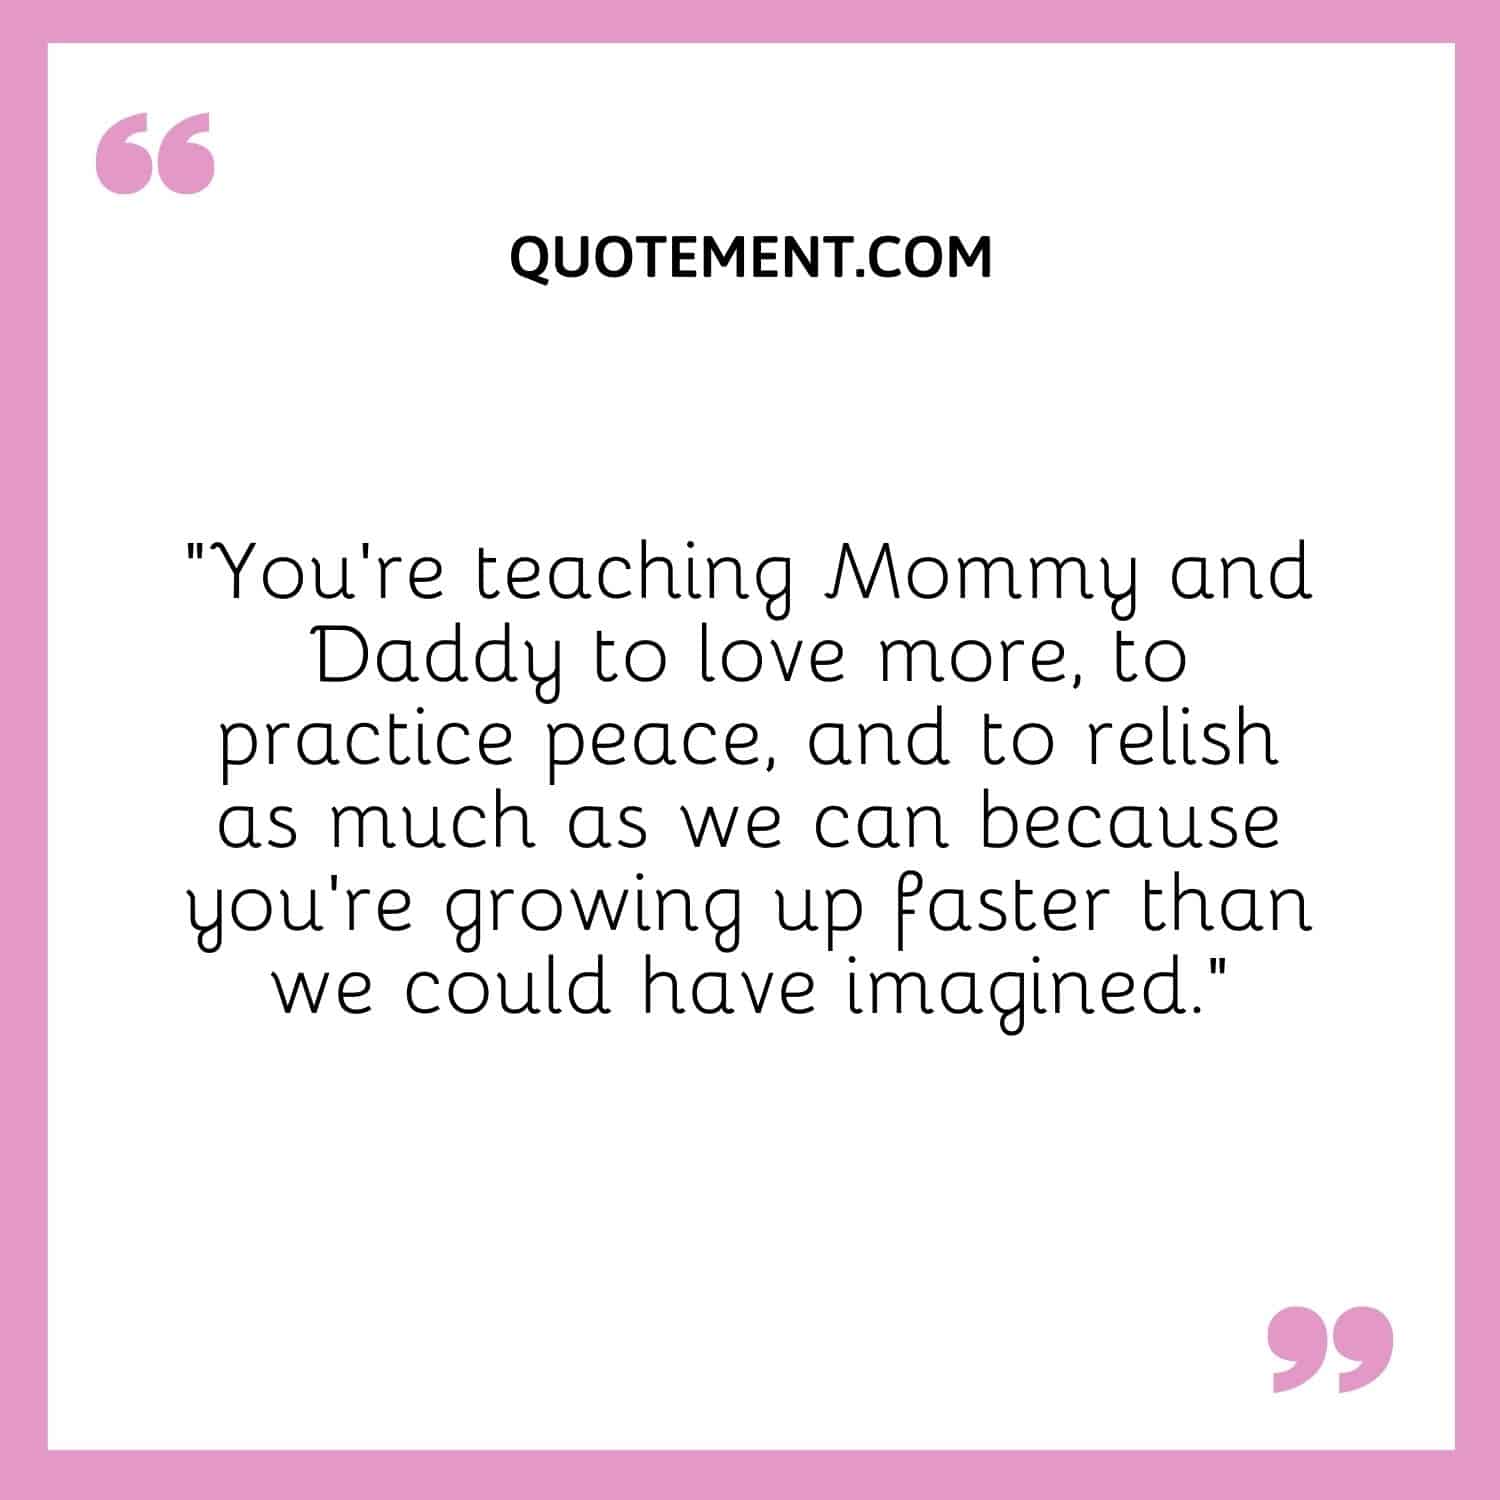 You’re teaching Mommy and Daddy to love more